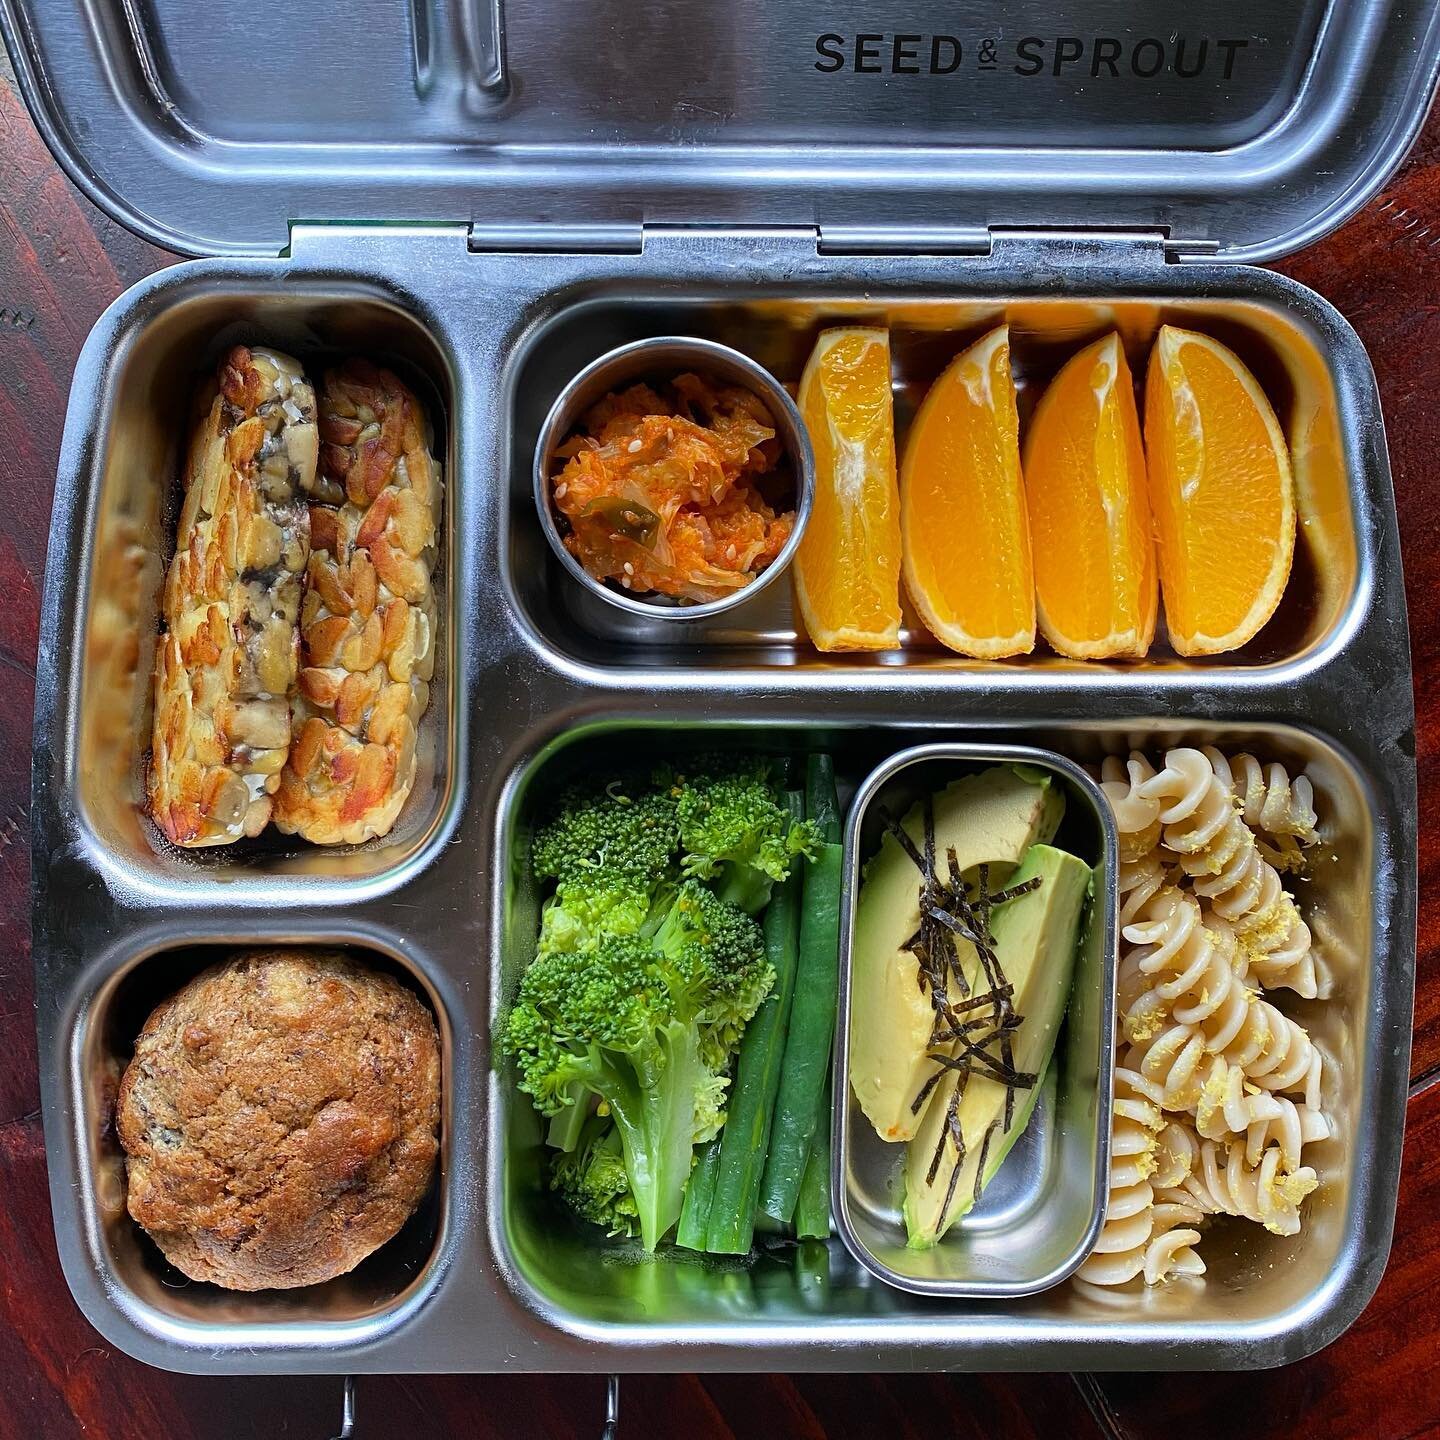 Finn&rsquo;s lunchbox for today 🍽

Fava bean tempeh
Steamed broccoli + green beans
Spelt spirals with olive oil 
Avocado + toasted nori
Kimchi
Orange 
Wholemeal banana cinnamon muffin